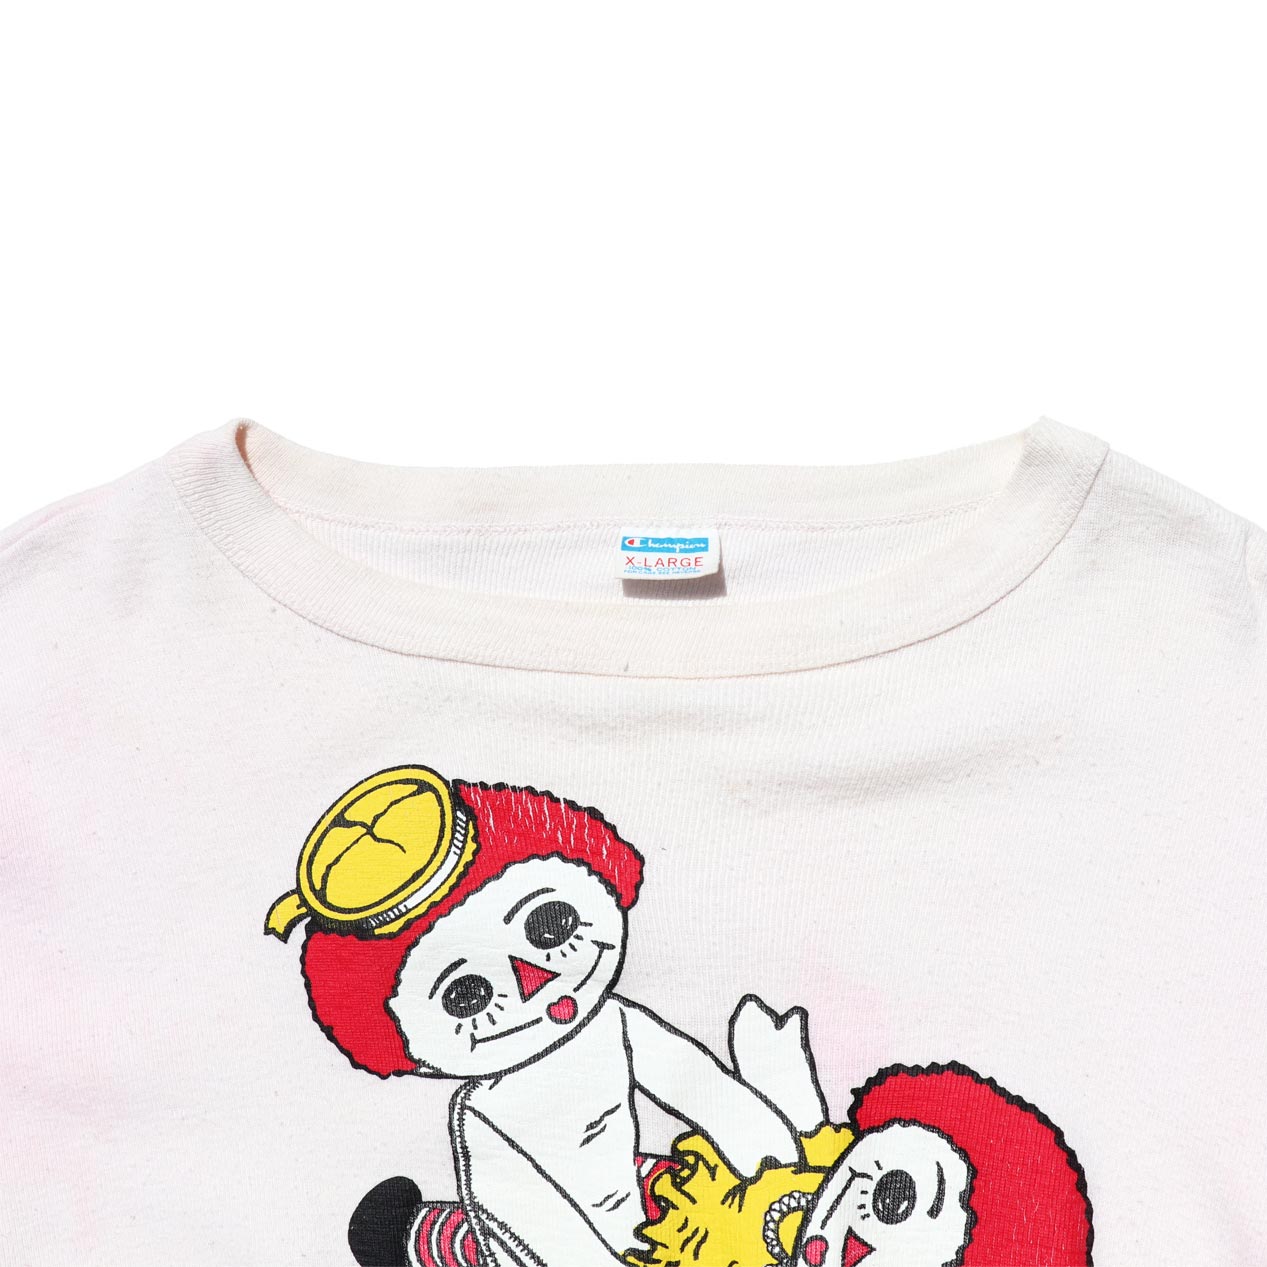 Post Junk 70 S Champion Sex Raggedy Ann And Andy Baseball T Shirt Made In U S A [xl]